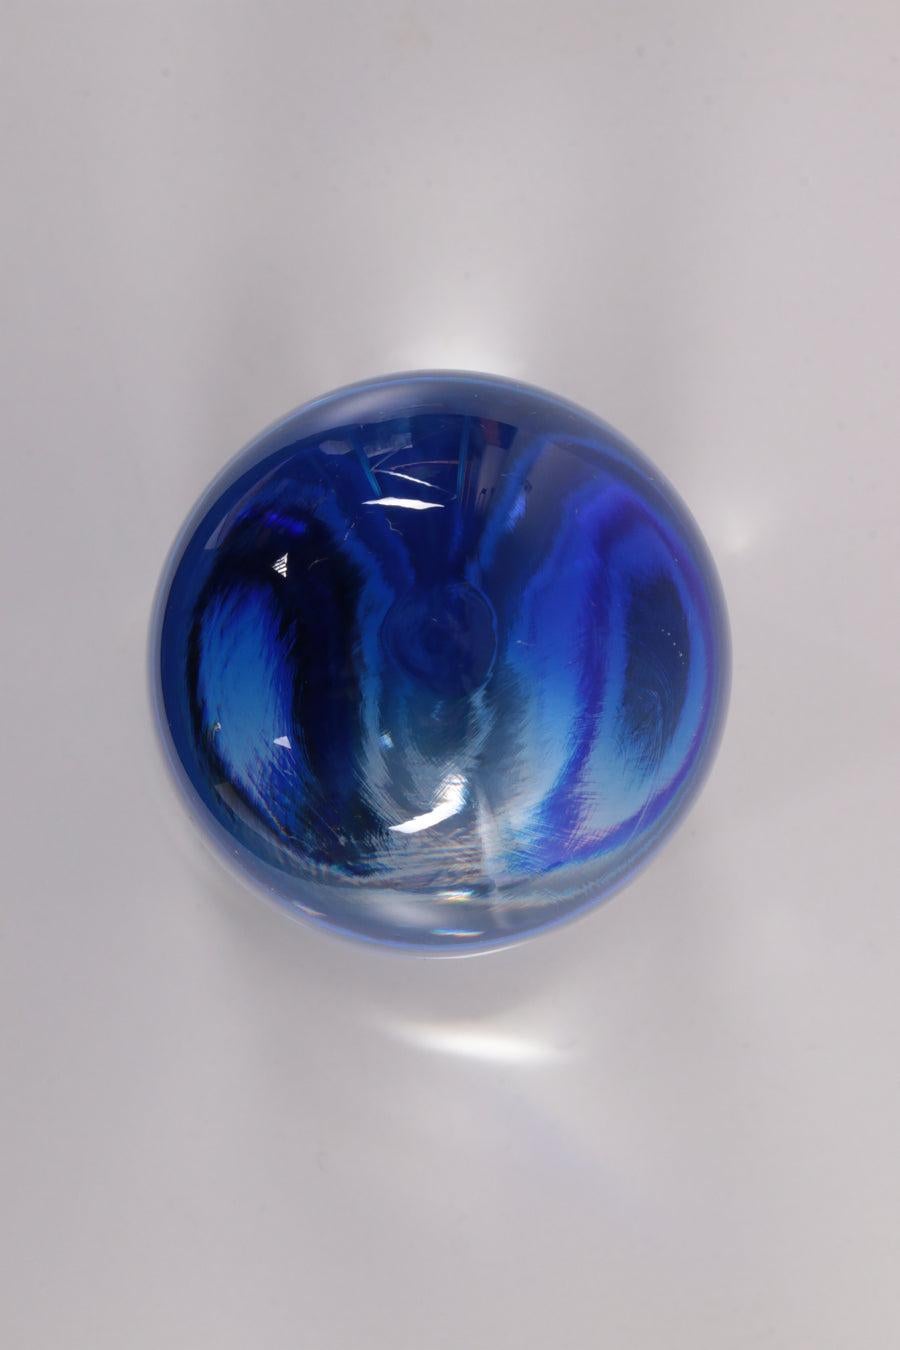 Paperweight Marked in Blue with W. Hessen O.Horn

A paperweight is an object that can be placed on a desk on top of papers to prevent them from blowing away. This goes back a long way, in Egypt they already used paperweight.

The word comes from